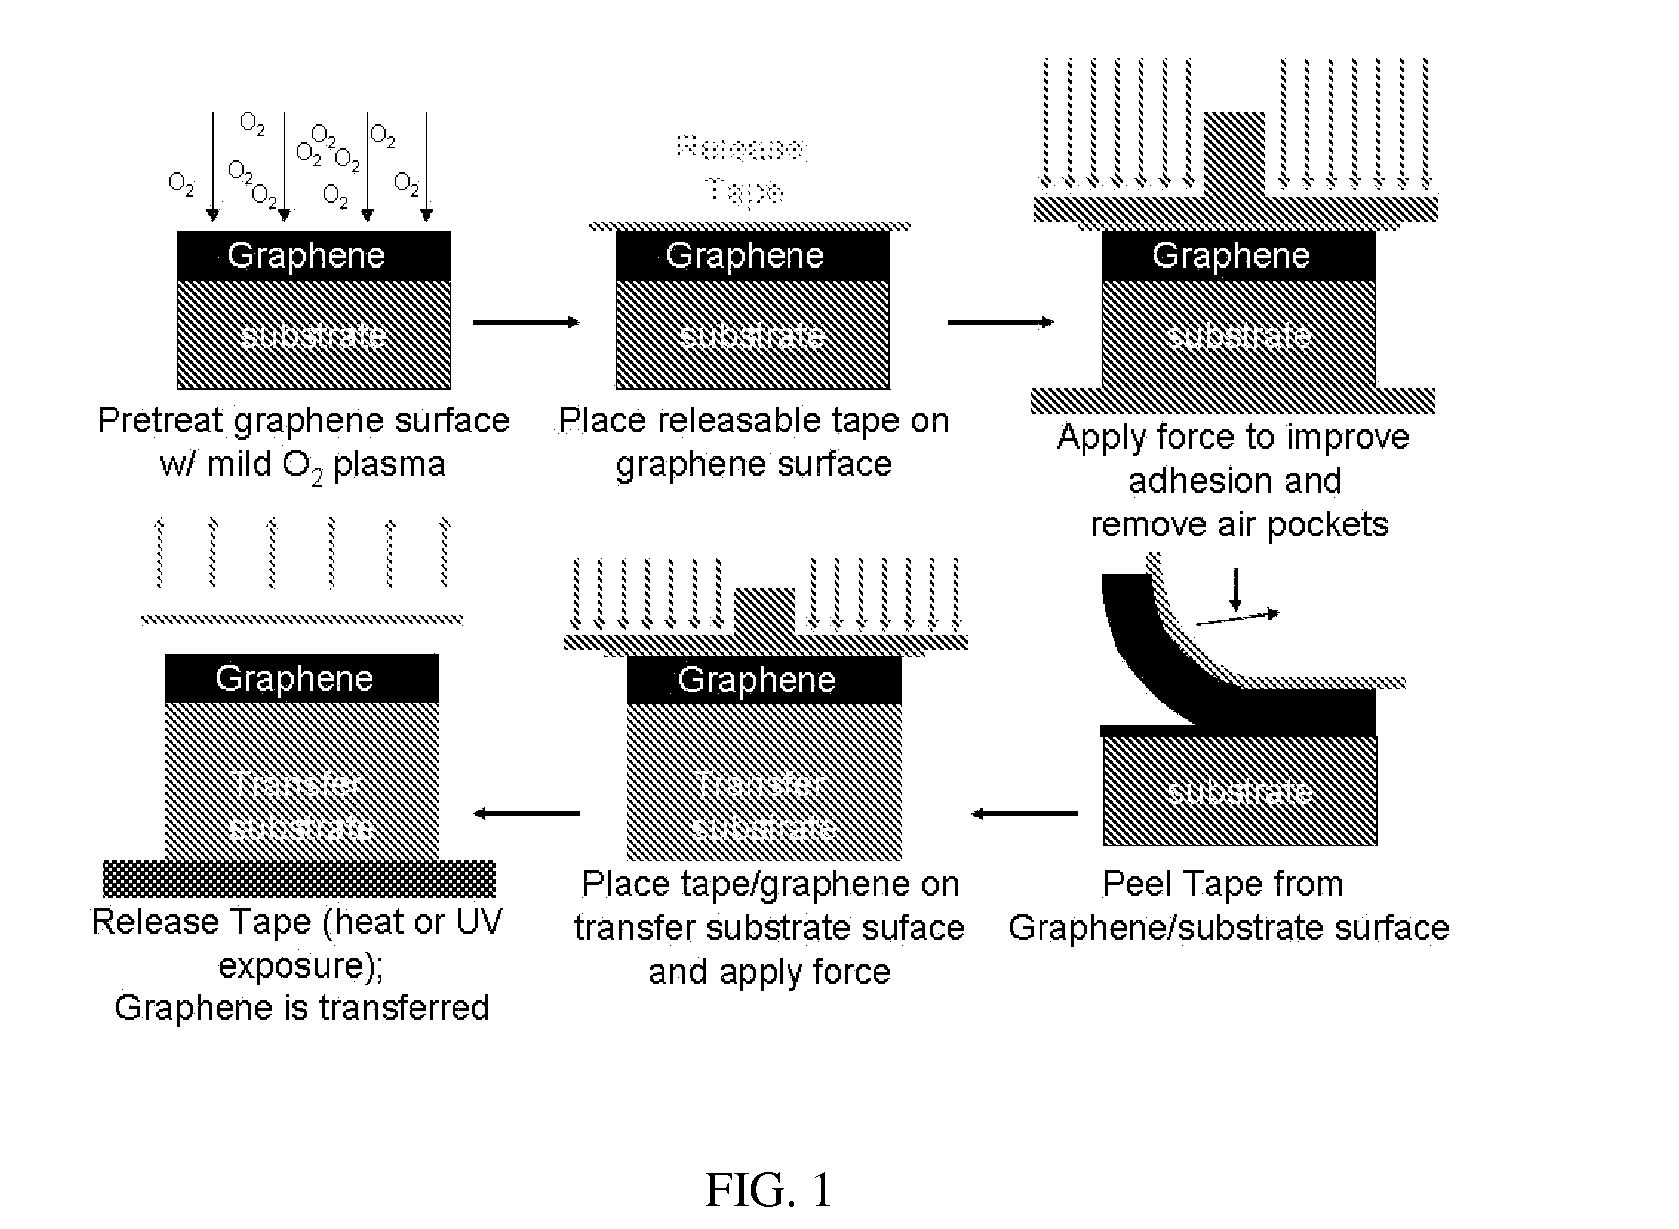 METHOD FOR THE REDUCTION OF GRAPHENE FILM THICKNESS AND THE REMOVAL AND TRANSFER OF EPITAXIAL GRAPHENE FILMS FROM SiC SUBSTRATES